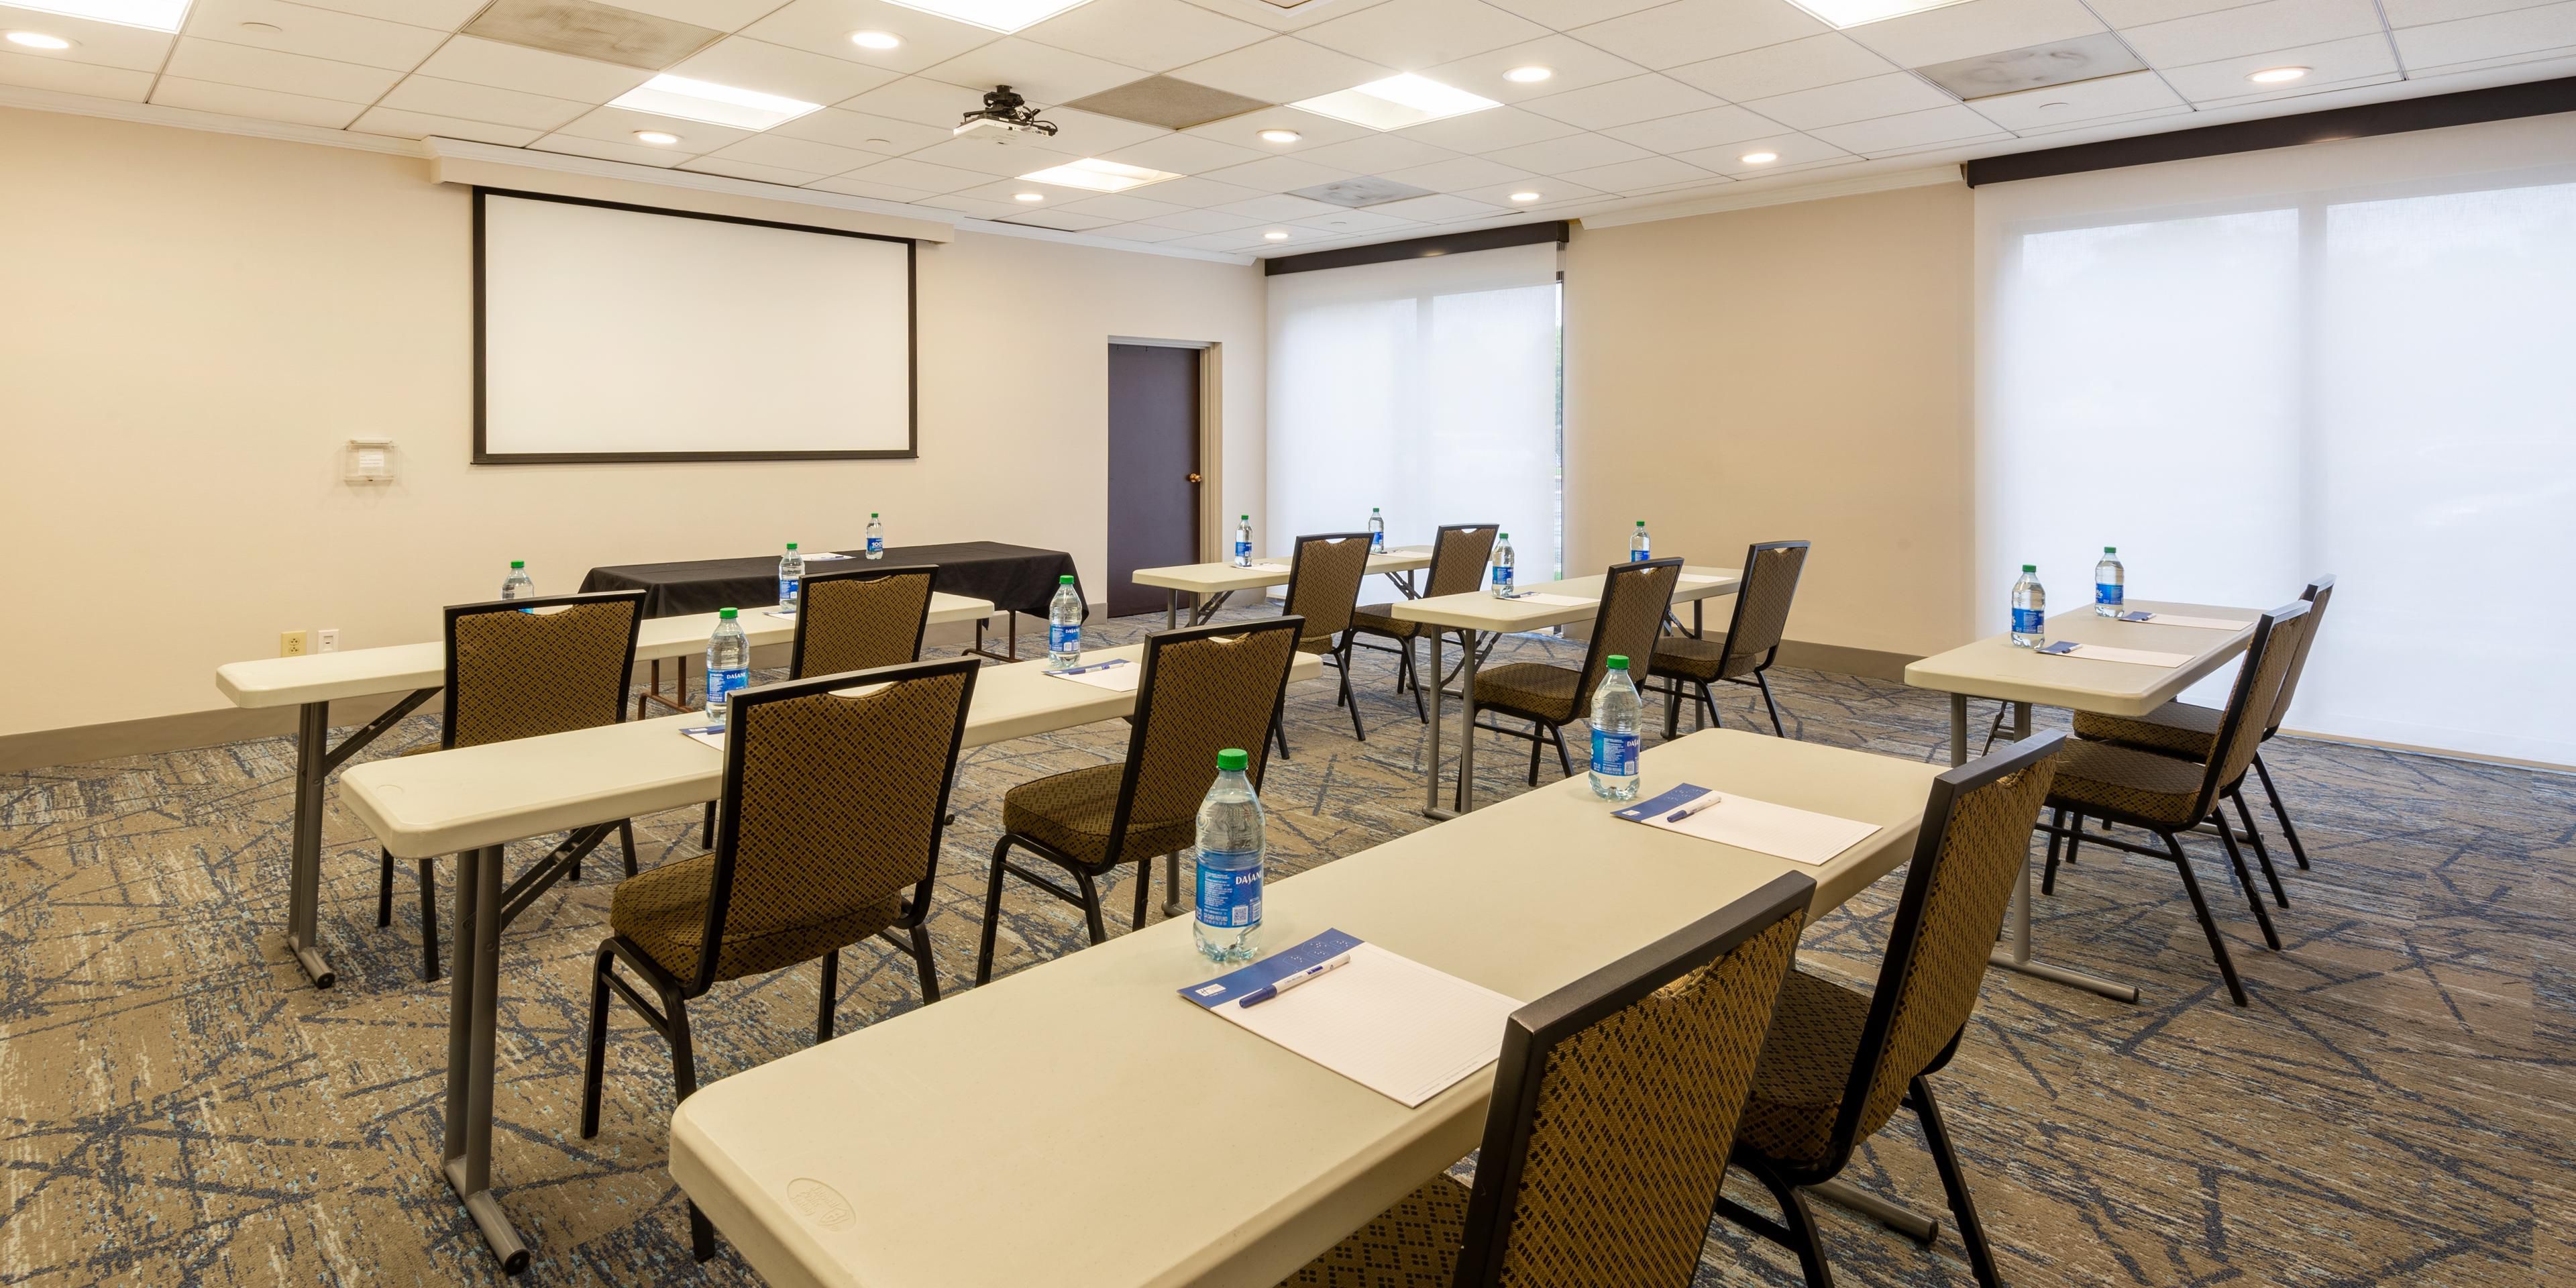 The Franklin Room is available to rent for your next small meeting or social event. Contact the sales department to reserve and organize your event. Have us handle the refreshments or bring in your own. You decide!